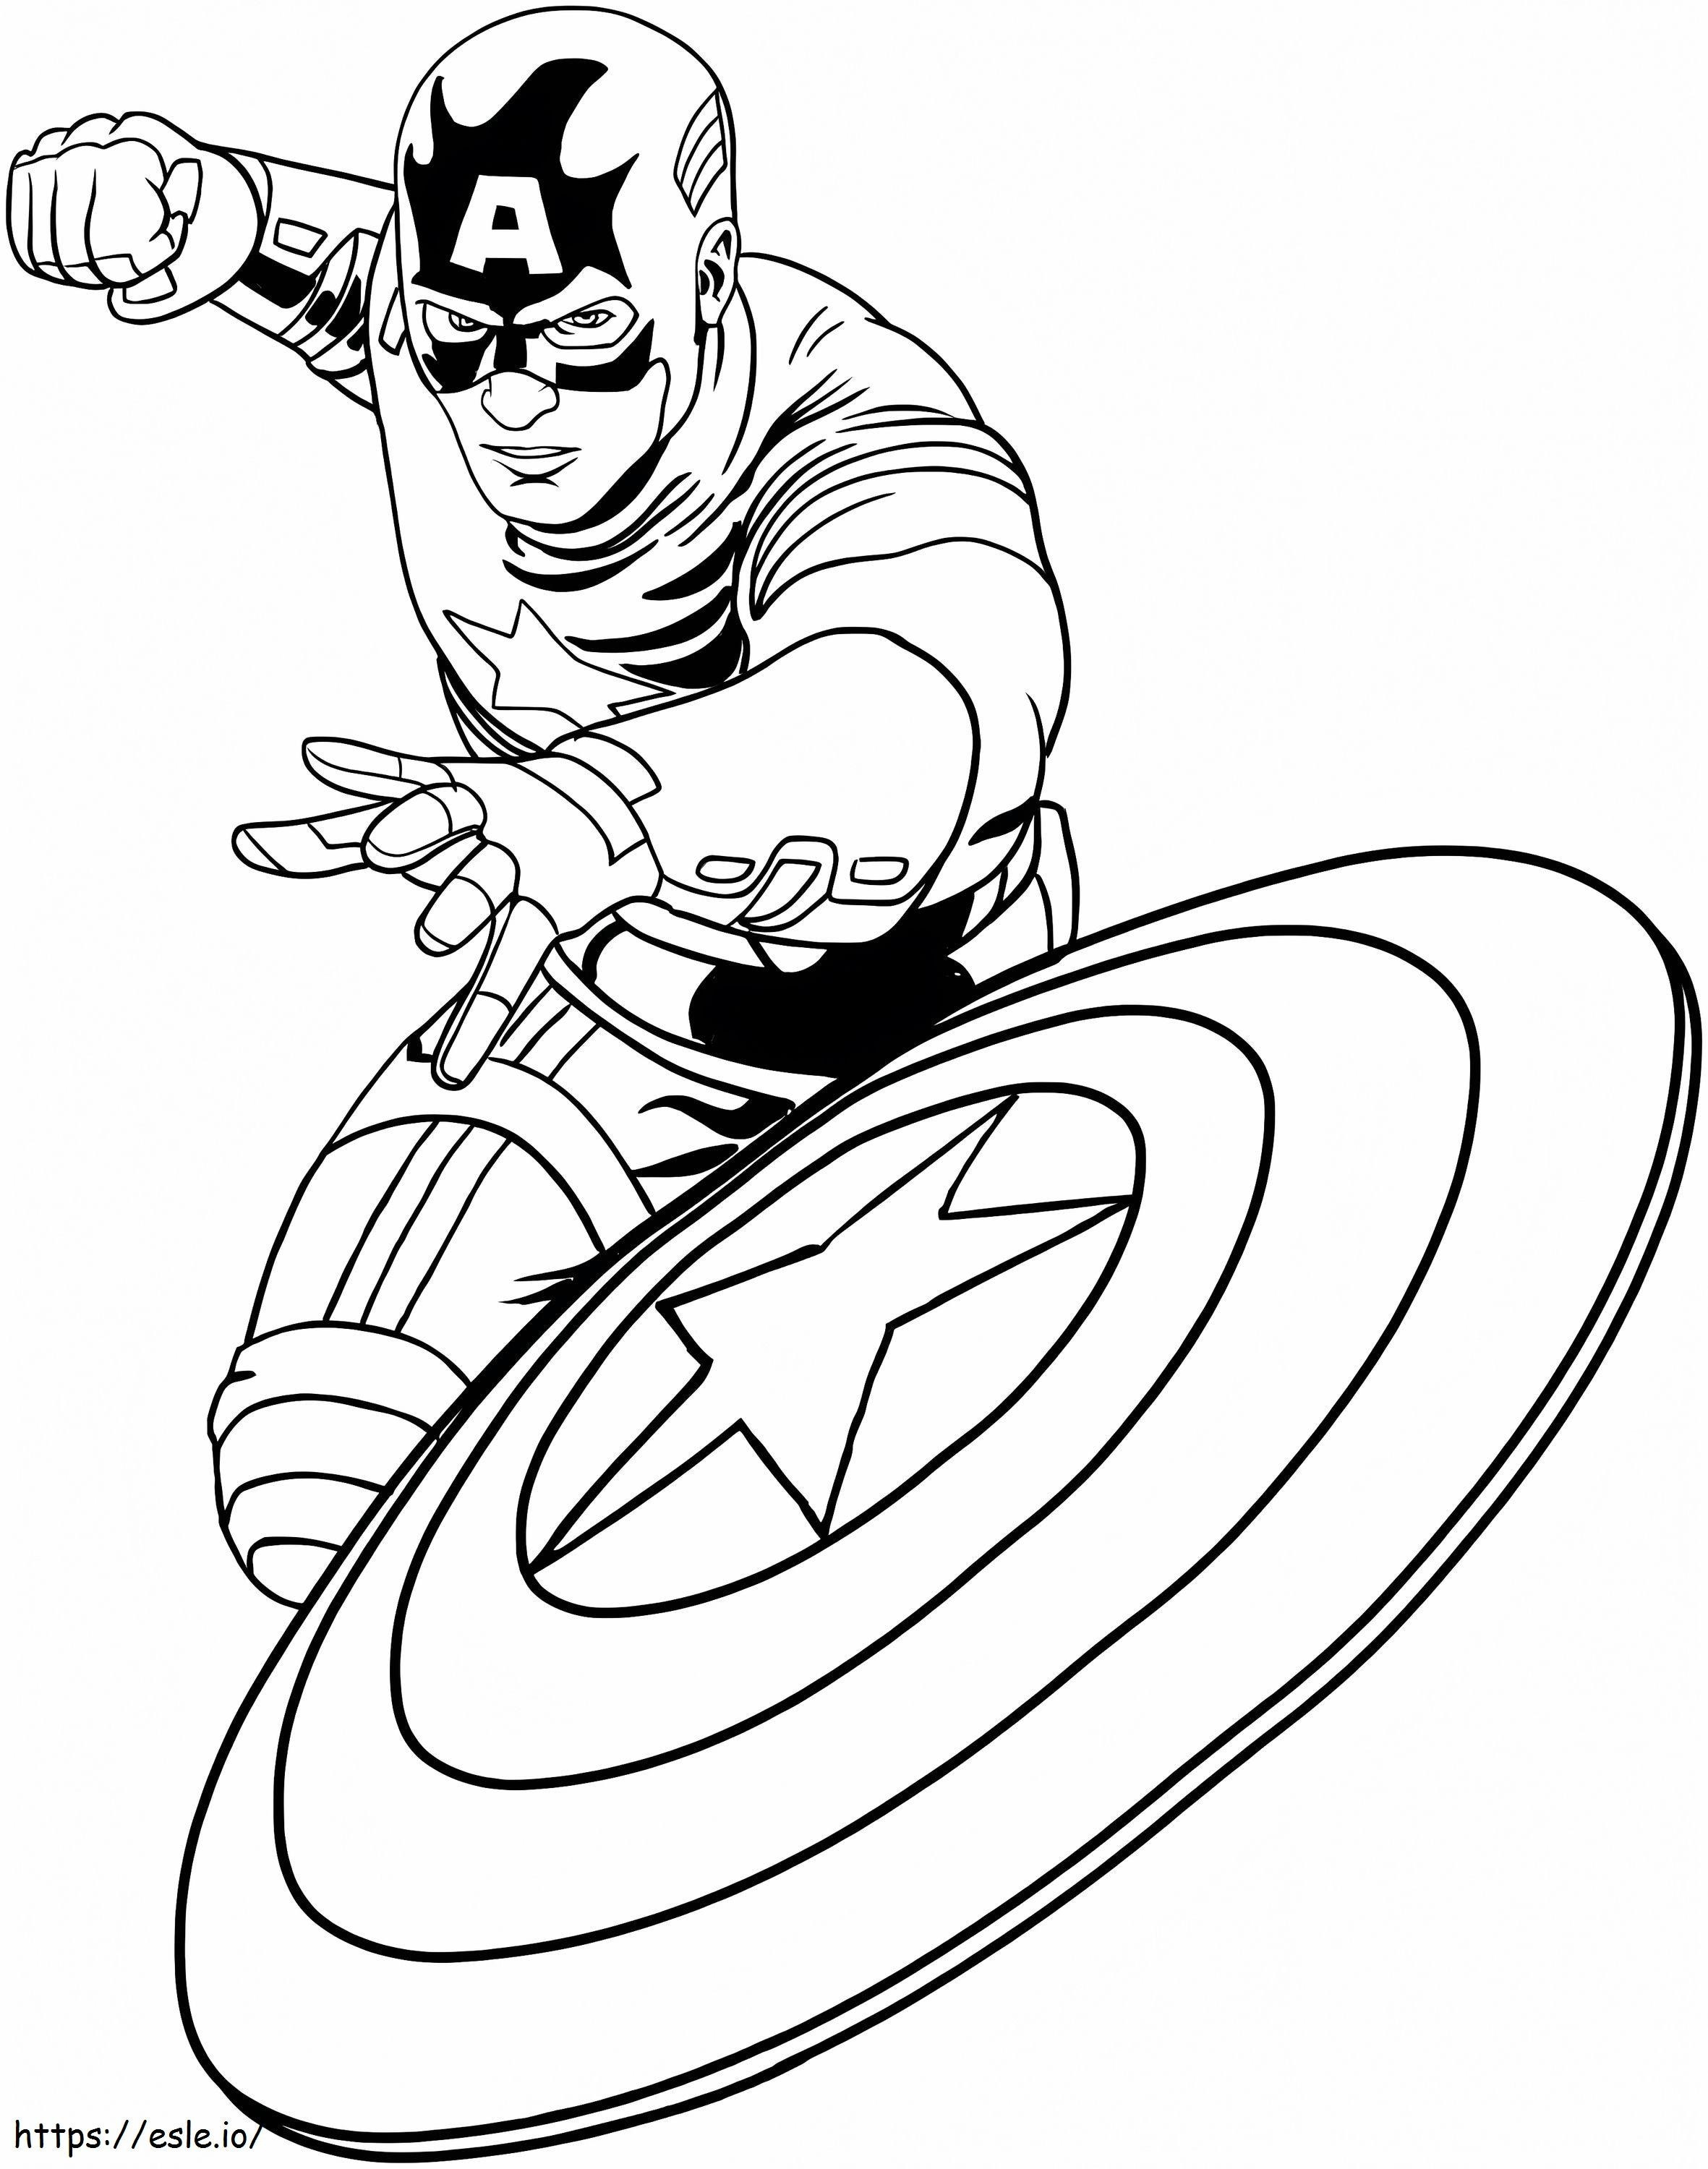 Captain America Throws Shield coloring page